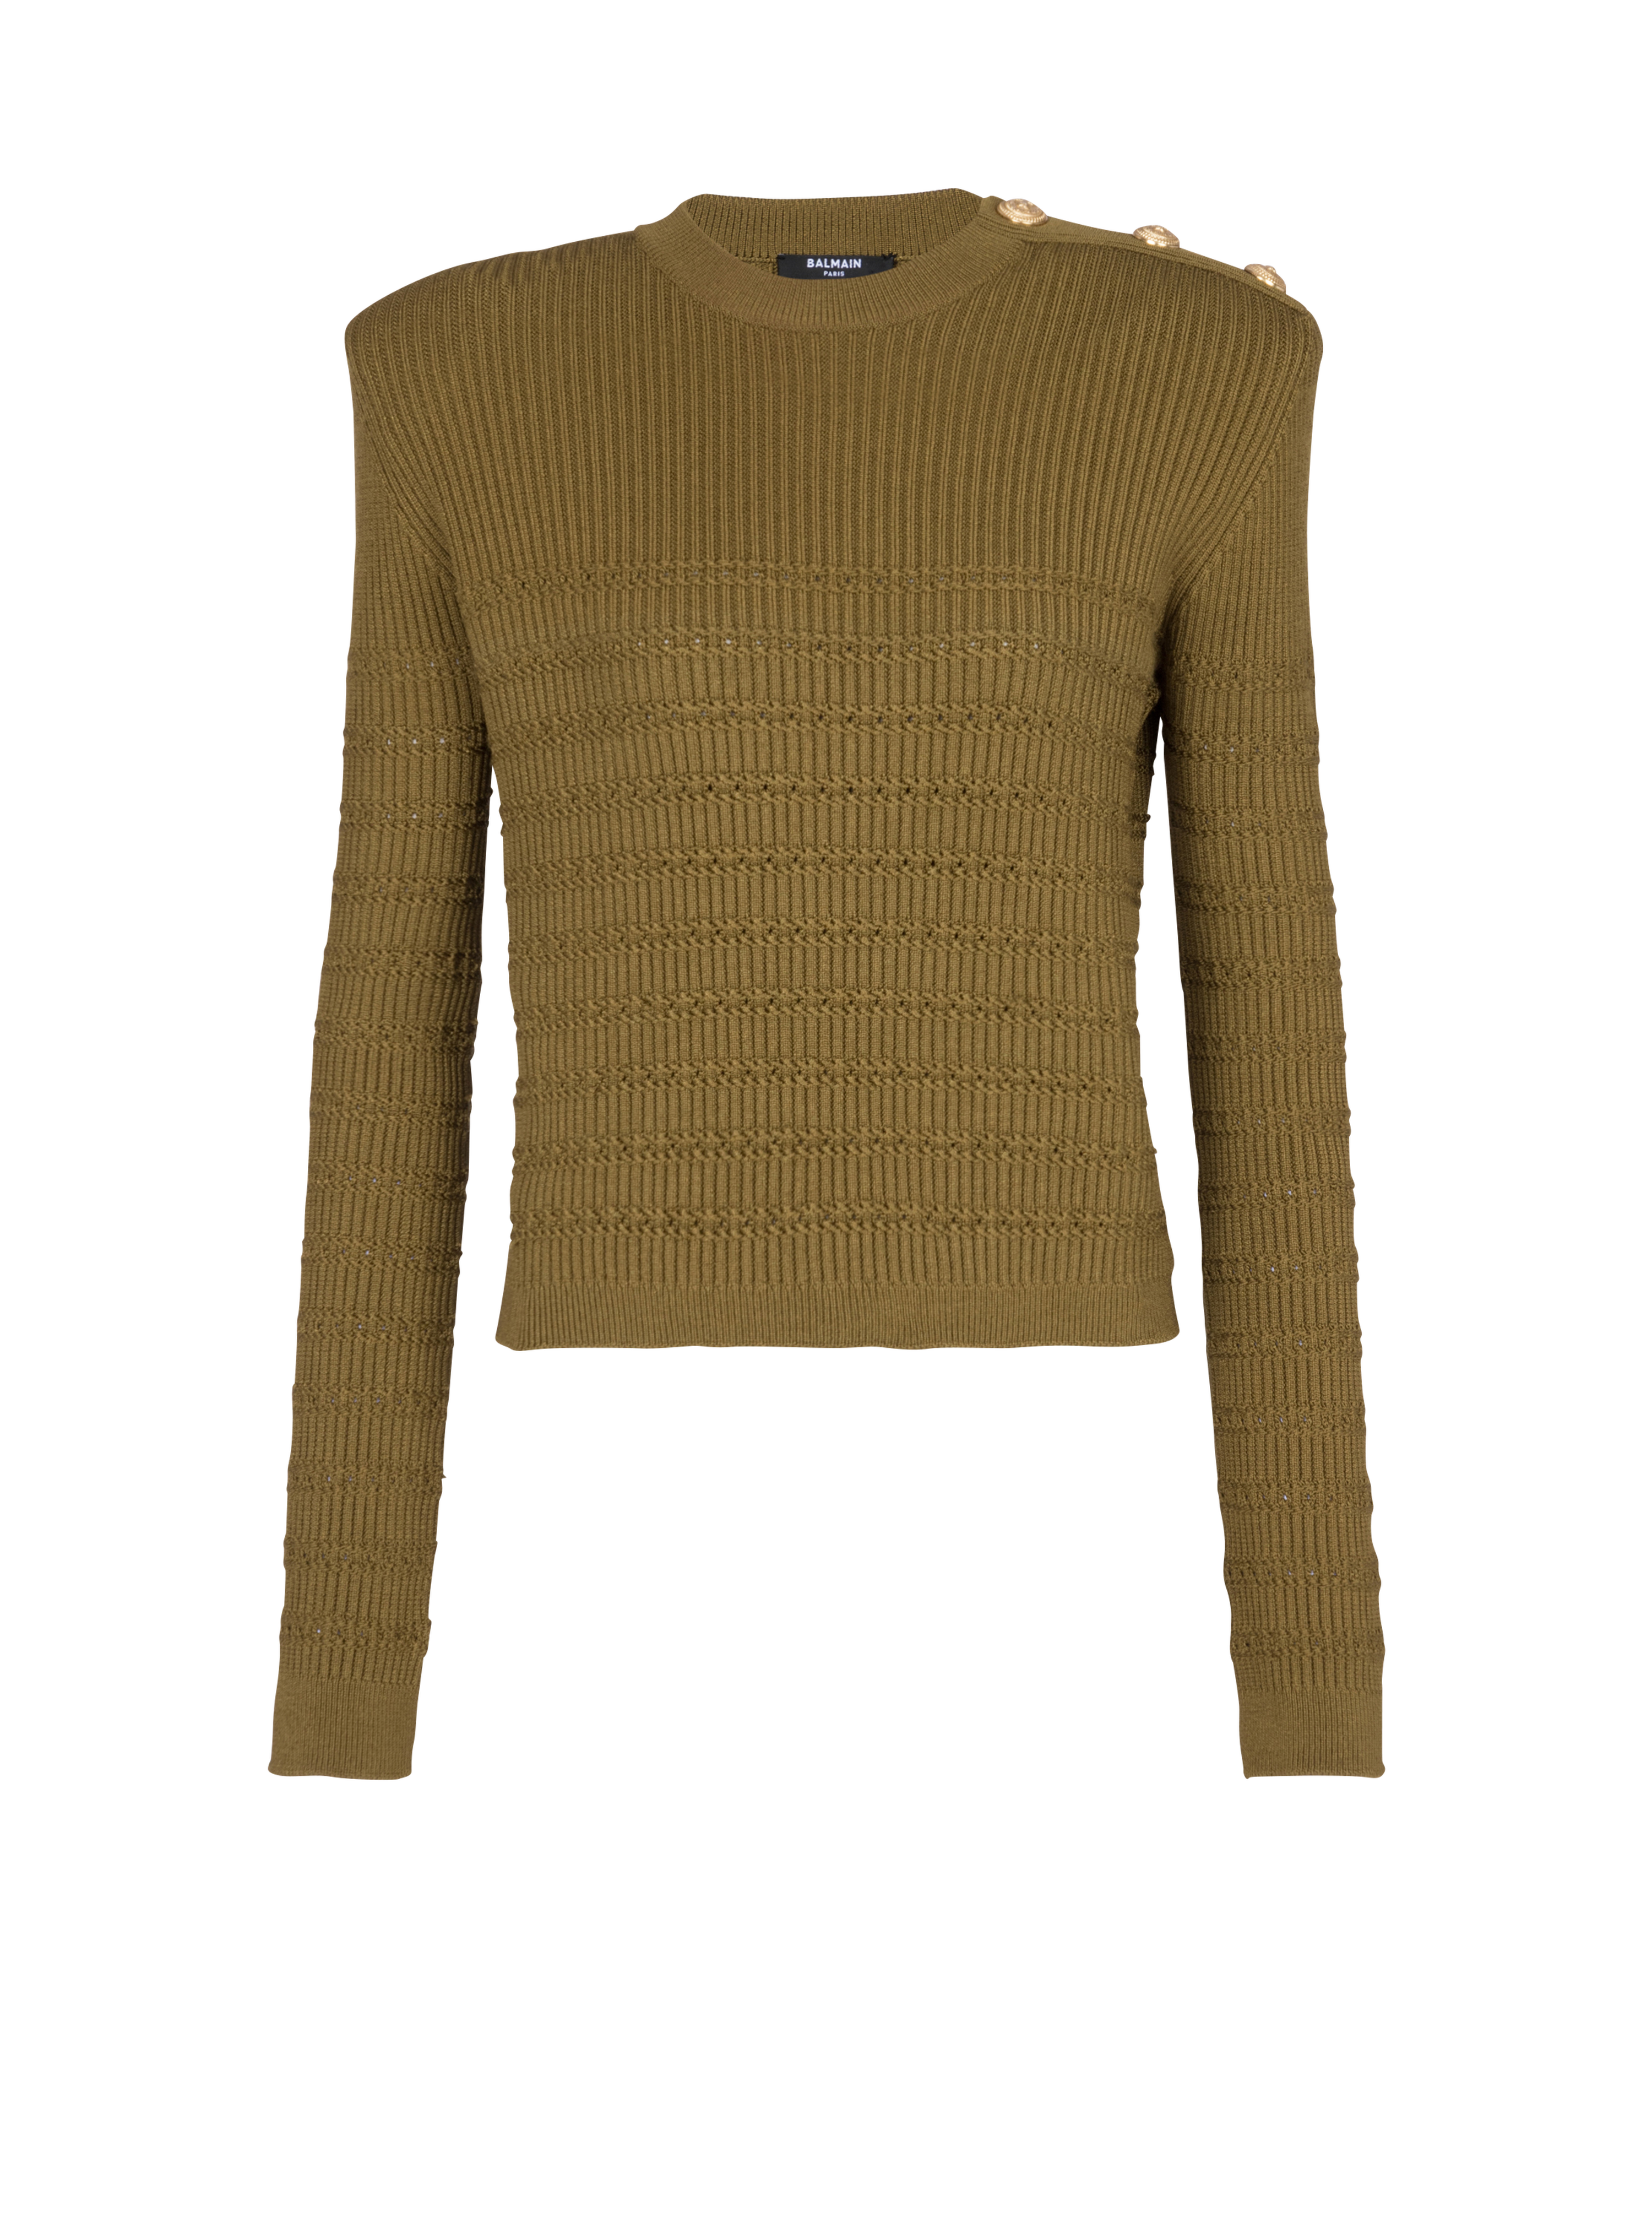 Knit jumper with gold buttons, khaki